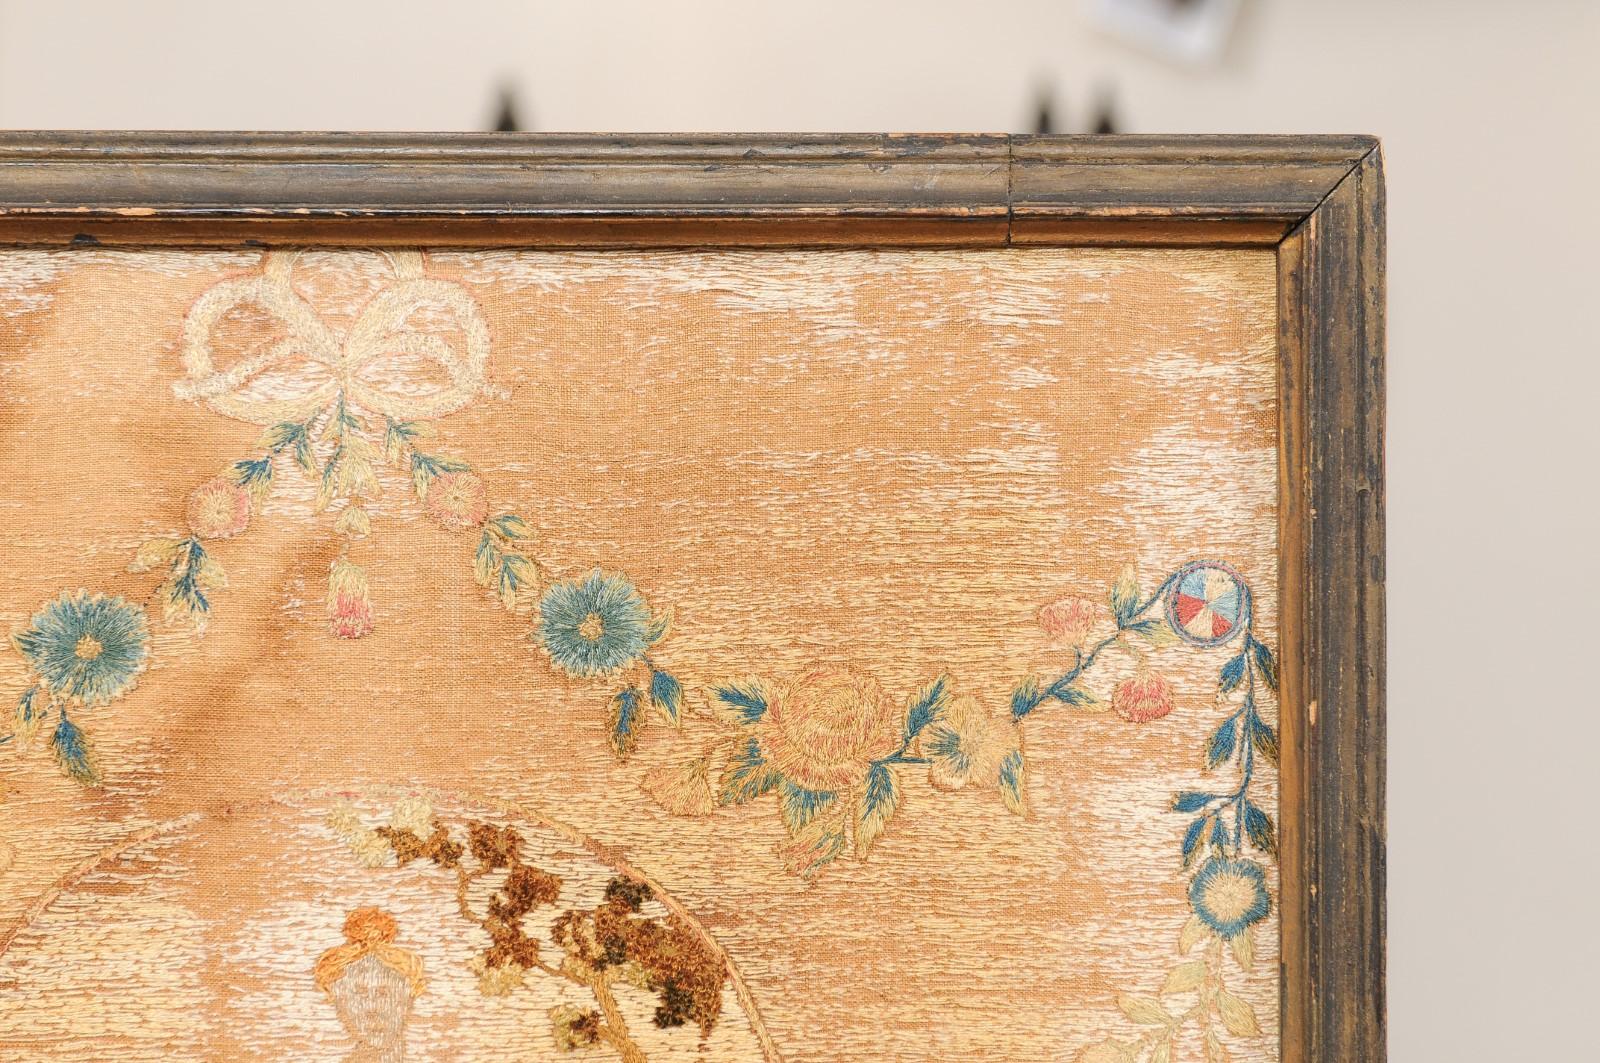  Framed 19th Century English Textile For Sale 5